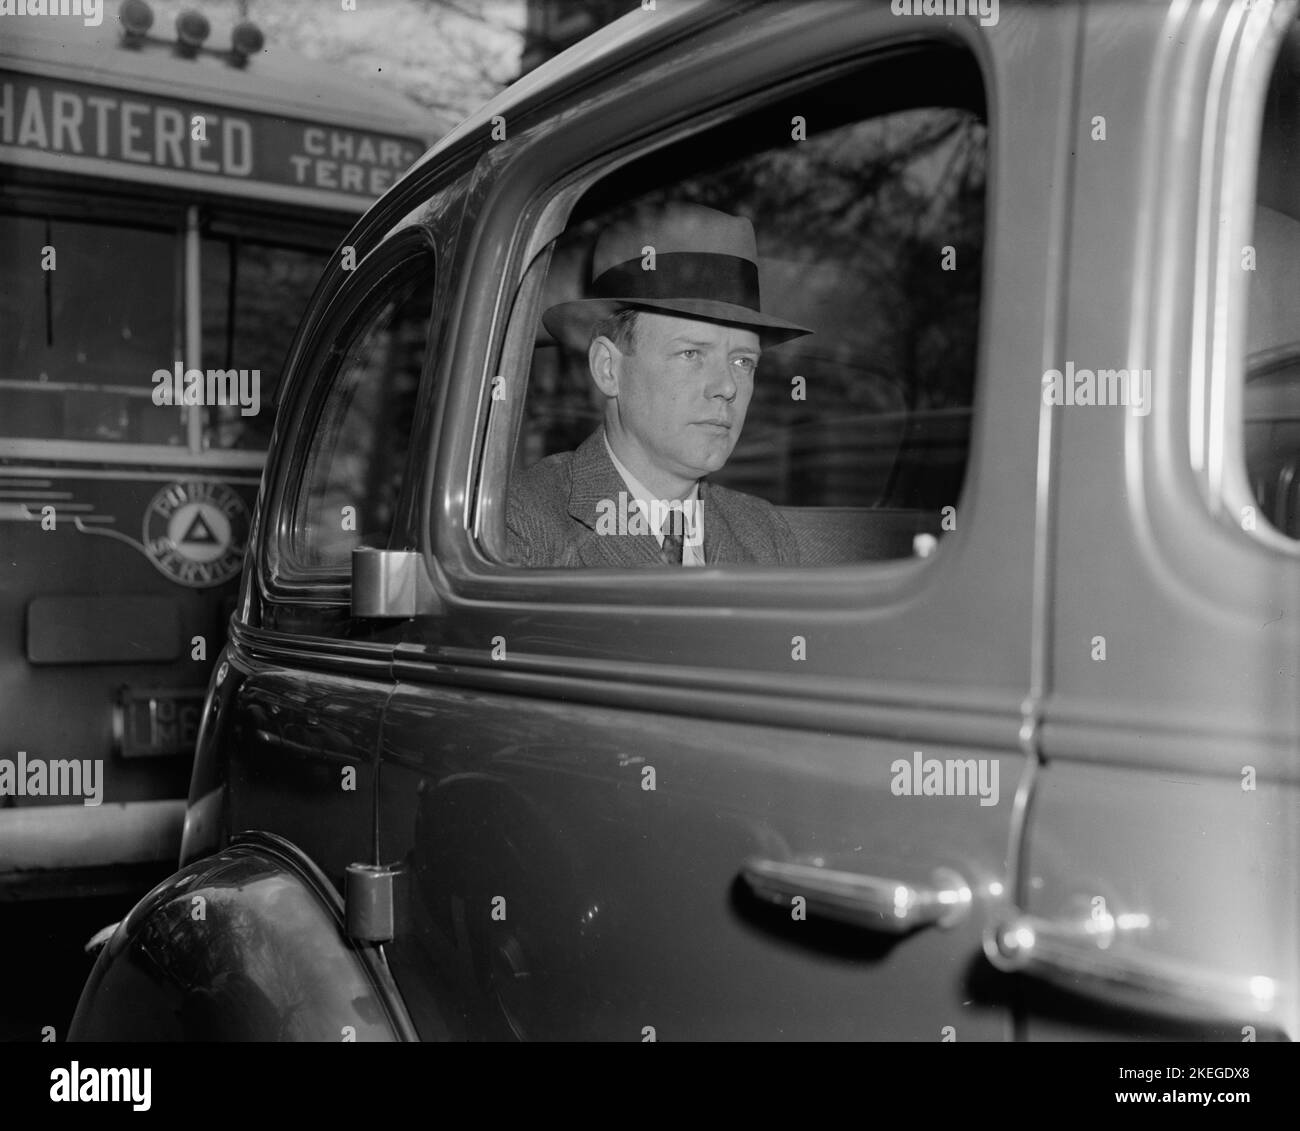 Lindbergh arrives at White House. Washington, D.C., April 20. Col. Charles A. Lindbergh, was called to active duty at the War Department - WWII 1939 Stock Photo